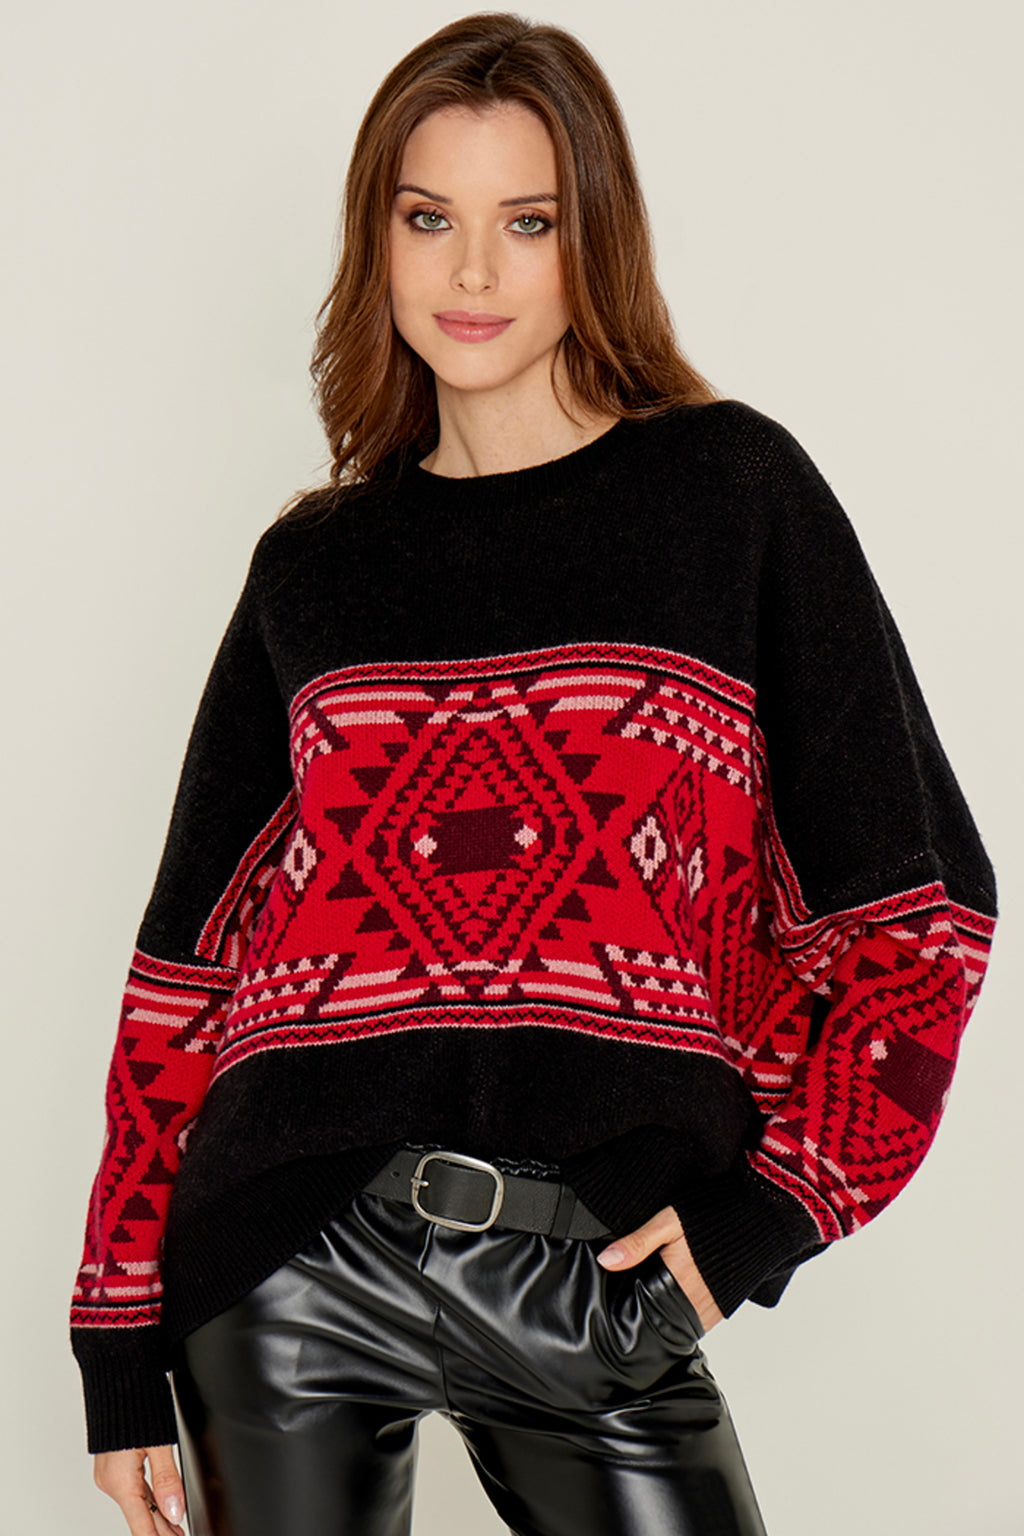 Five Jeans Sweater PW2329 Aztec Black & Red. - Sub Couture